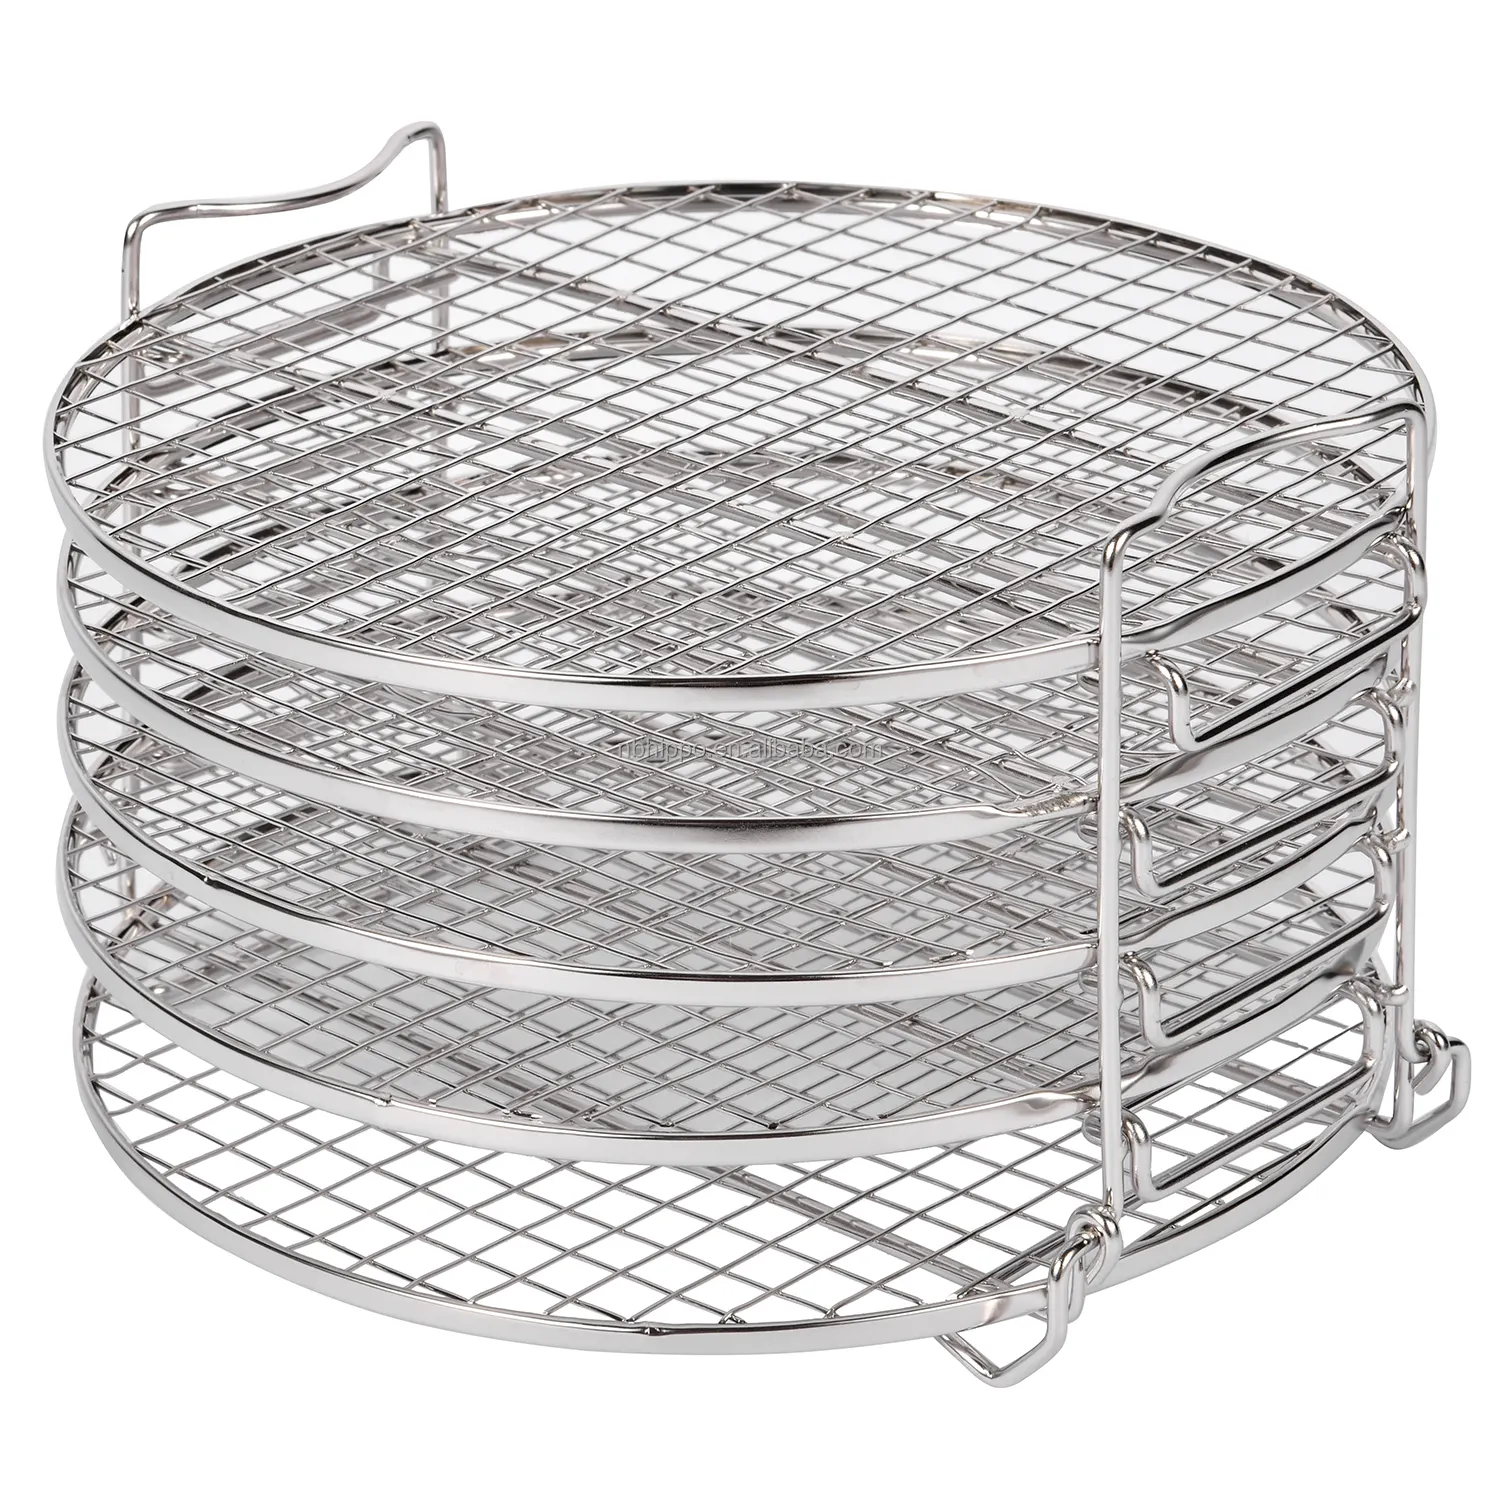 Stainless Steel cooks blender spare parts stackable 5 tiers air fryer crisping rack with tray